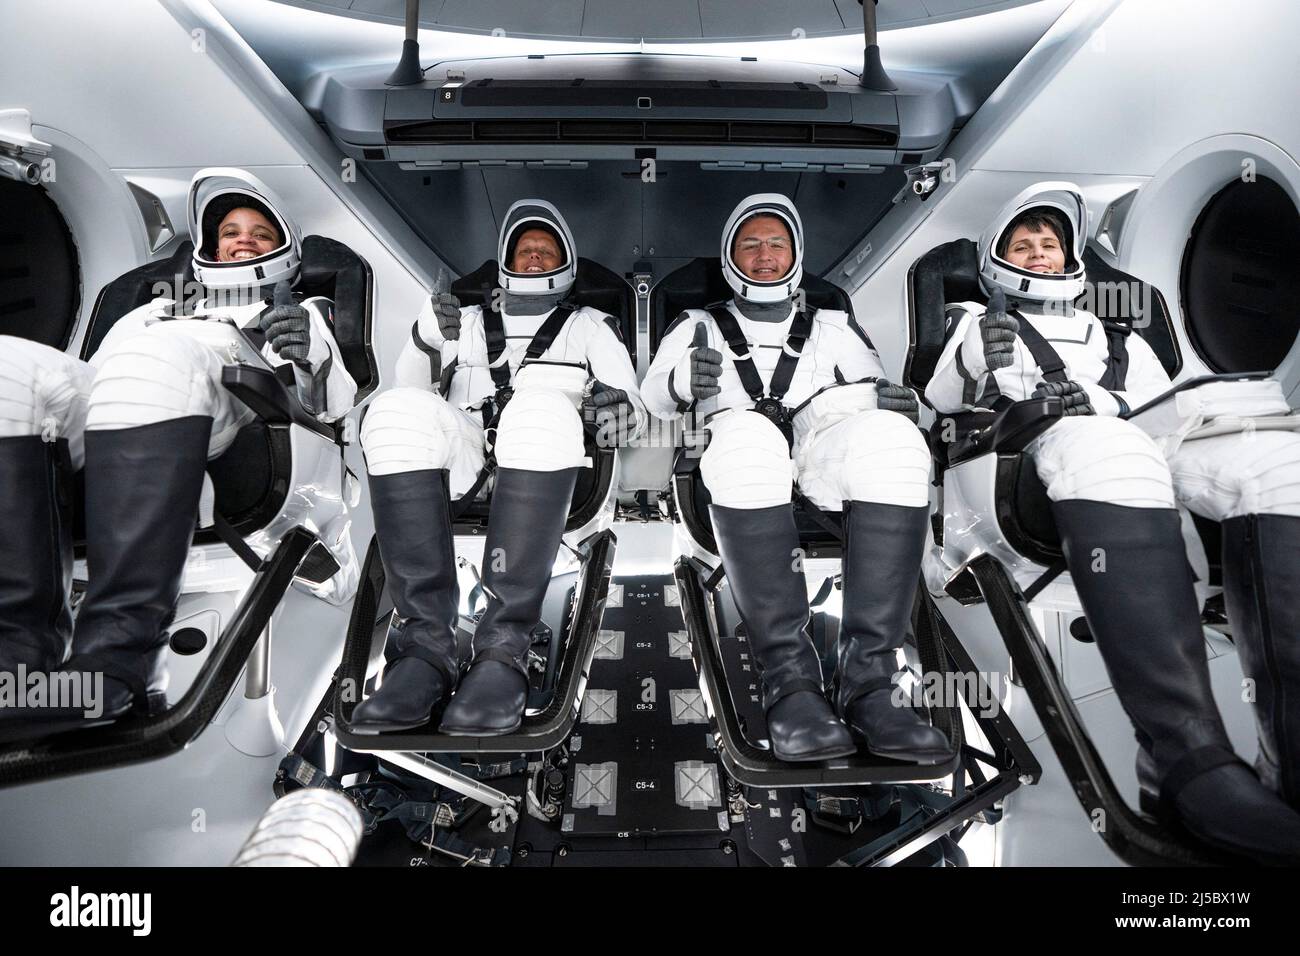 Crew-4 astronauts, from left, Jessica Watson, mission specialist; Bob Hines, pilot; Kjell Lindgren, commander and Samantha Cristoforetti, mission specialist, are positioned inside SpaceX’s Crew Dragon, named Freedom by the Crew-4 crew, during a dry dress rehearsal at Kennedy Space Center in Florida on April 20, 2022. Crew-4 will launch the astronauts to the International Space Station as part of NASA’s Commercial Crew Program. Liftoff is targeted for 5:26 a.m. EDT on Saturday, April 23, 2022, from Launch Complex 39A at Kennedy. Photo by SpaceX via CNP/ABACAPRESS.COM Stock Photo